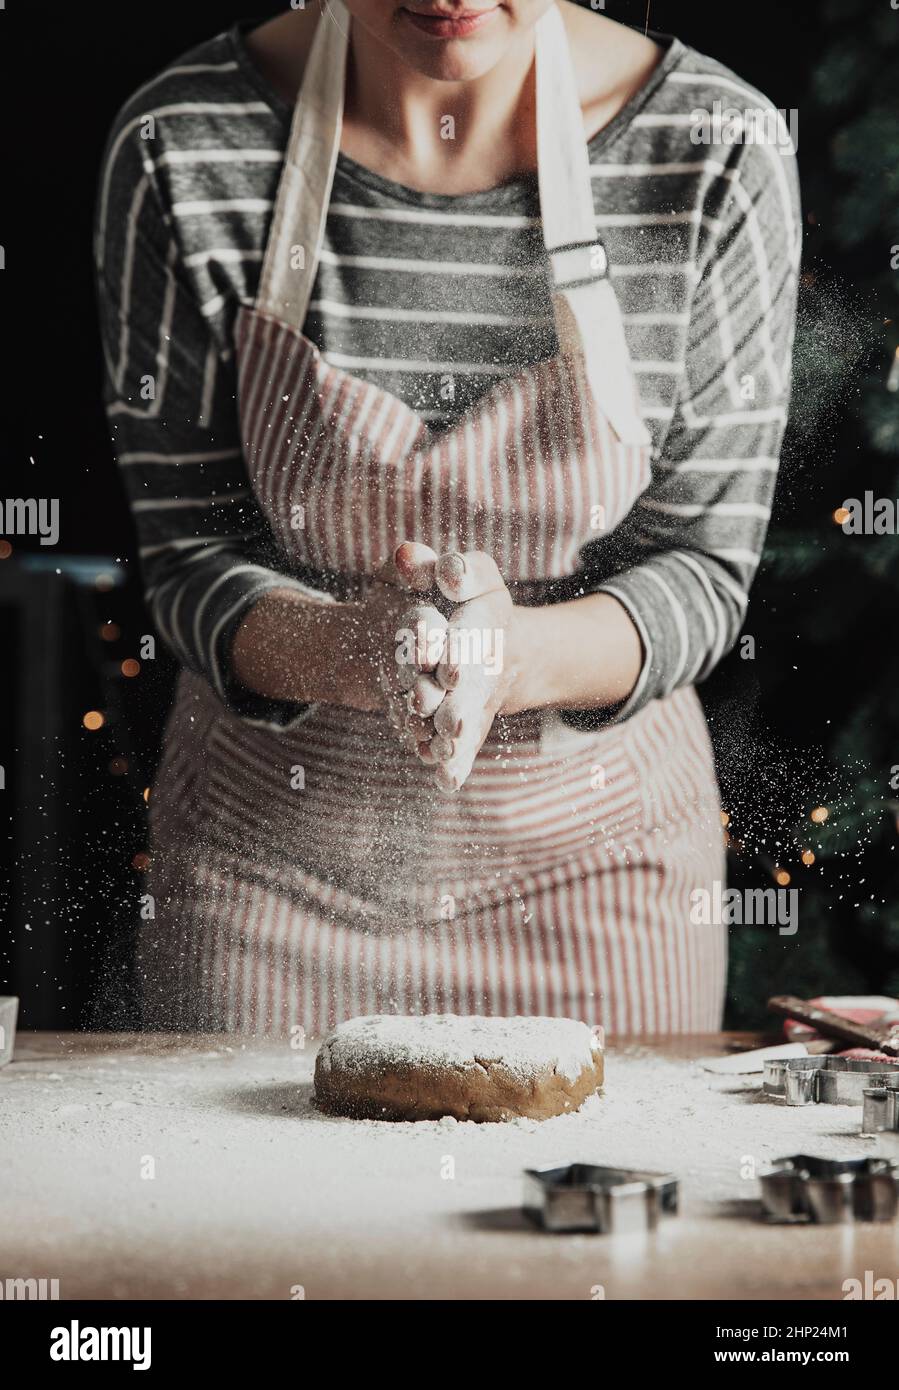 Merry Christmas, Happy New Year. Gingerbread cooking, cake, strudel baking. The woman in apron is preparing cookies. Slapping palms, splashing flour o Stock Photo